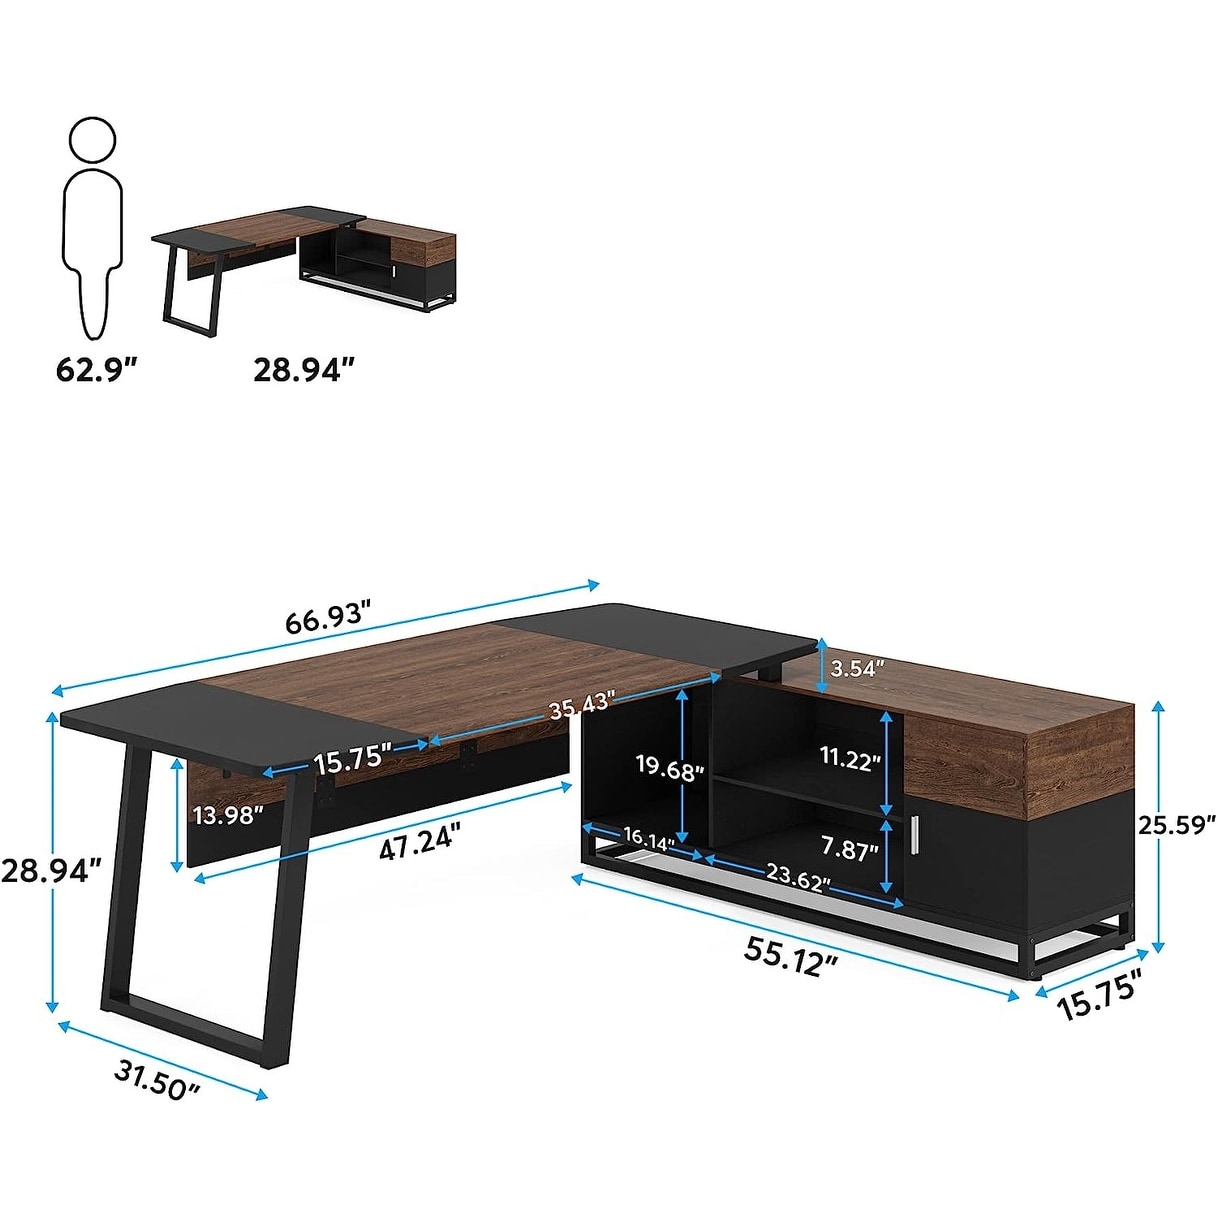 https://ak1.ostkcdn.com/images/products/is/images/direct/49858e6a161939fc2cd9a6e147480b1bac6044bf/67%22-L-Shaped-Executive-Desk-with-55%22-File-Cabinet-for-Home-Office.jpg